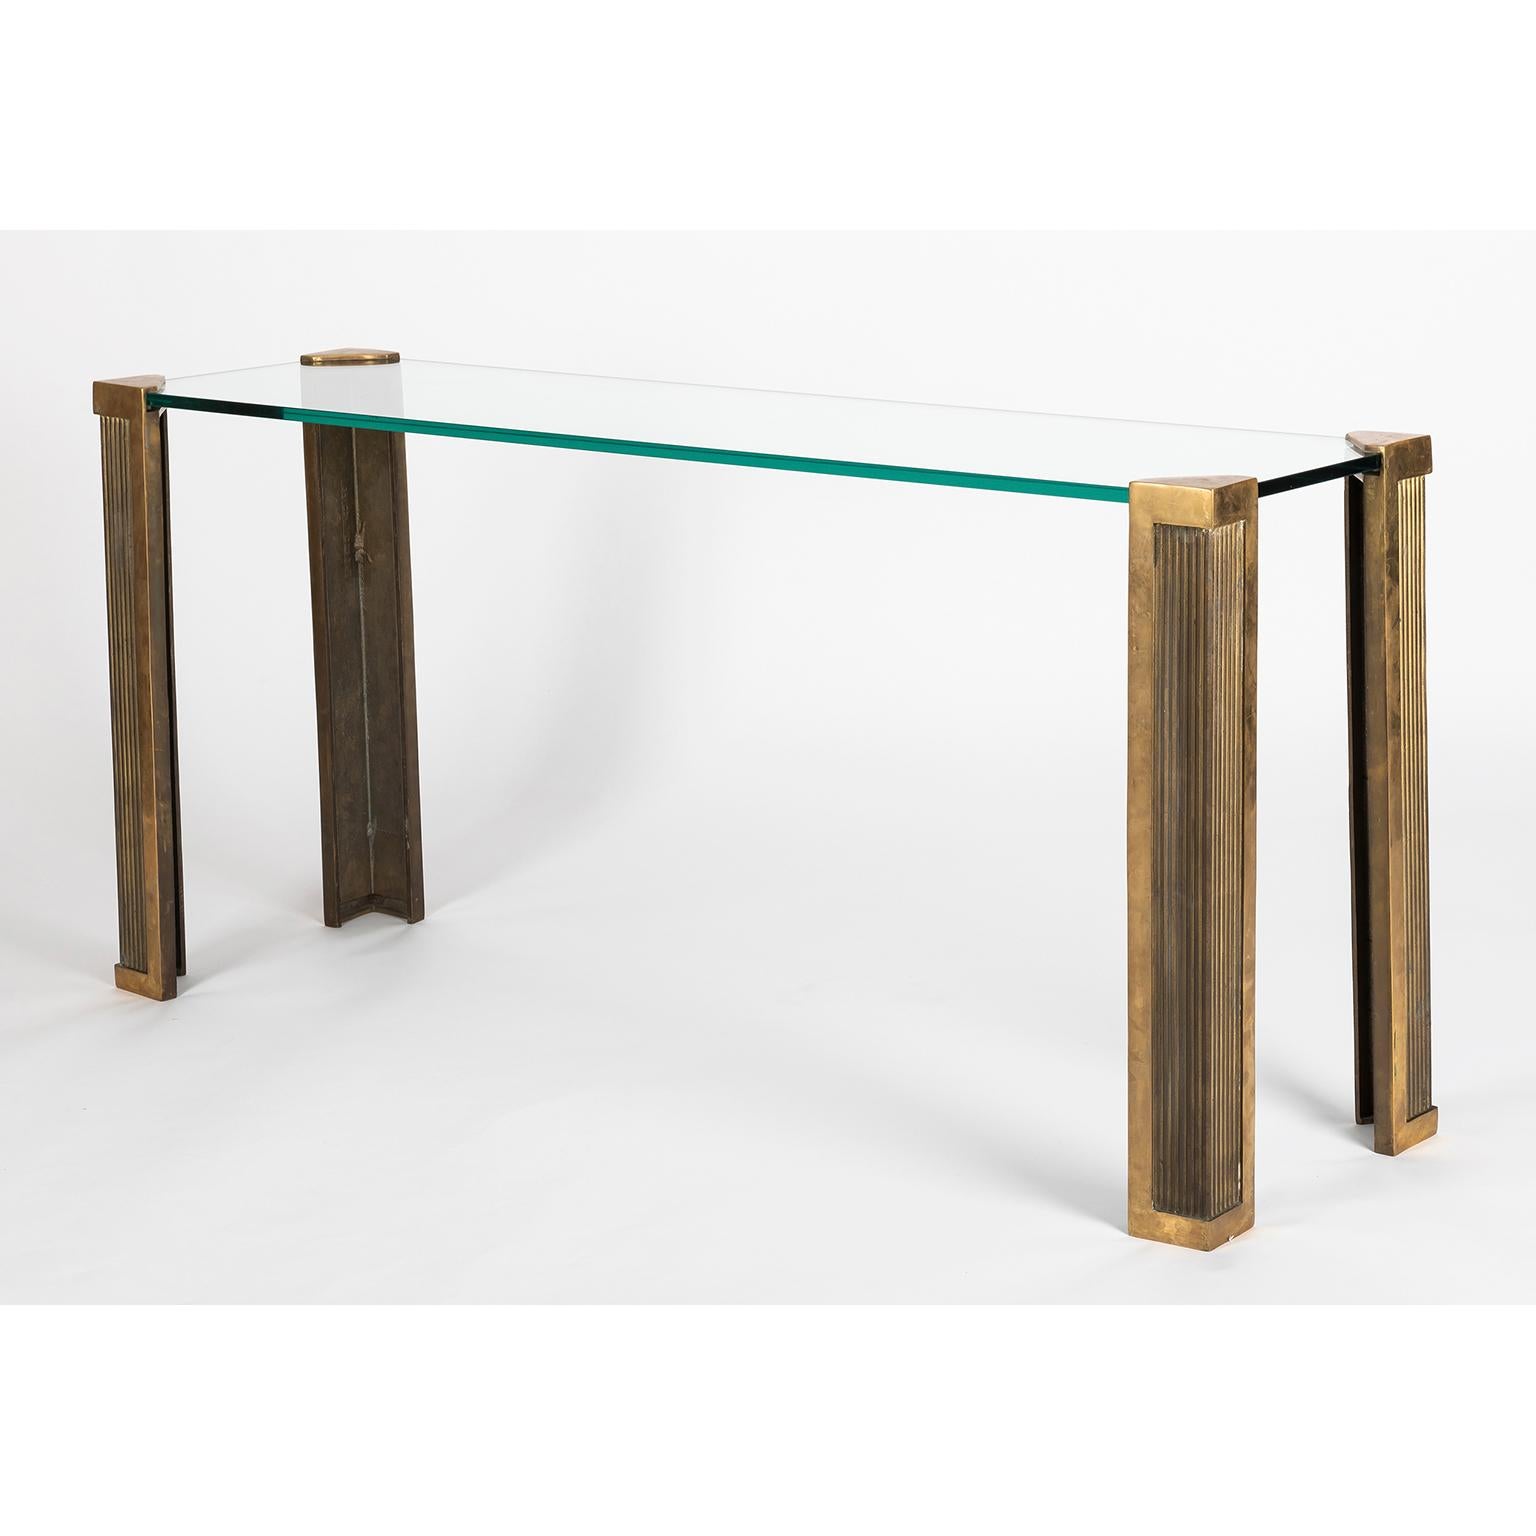 Originaly from Budapest, Peter Ghyczy has been living in the Netherlands for many years and this is where he creates and produces his furniture.

This both elegant and impressive console table is a design from the 1970s.
The thick glass (15mm)